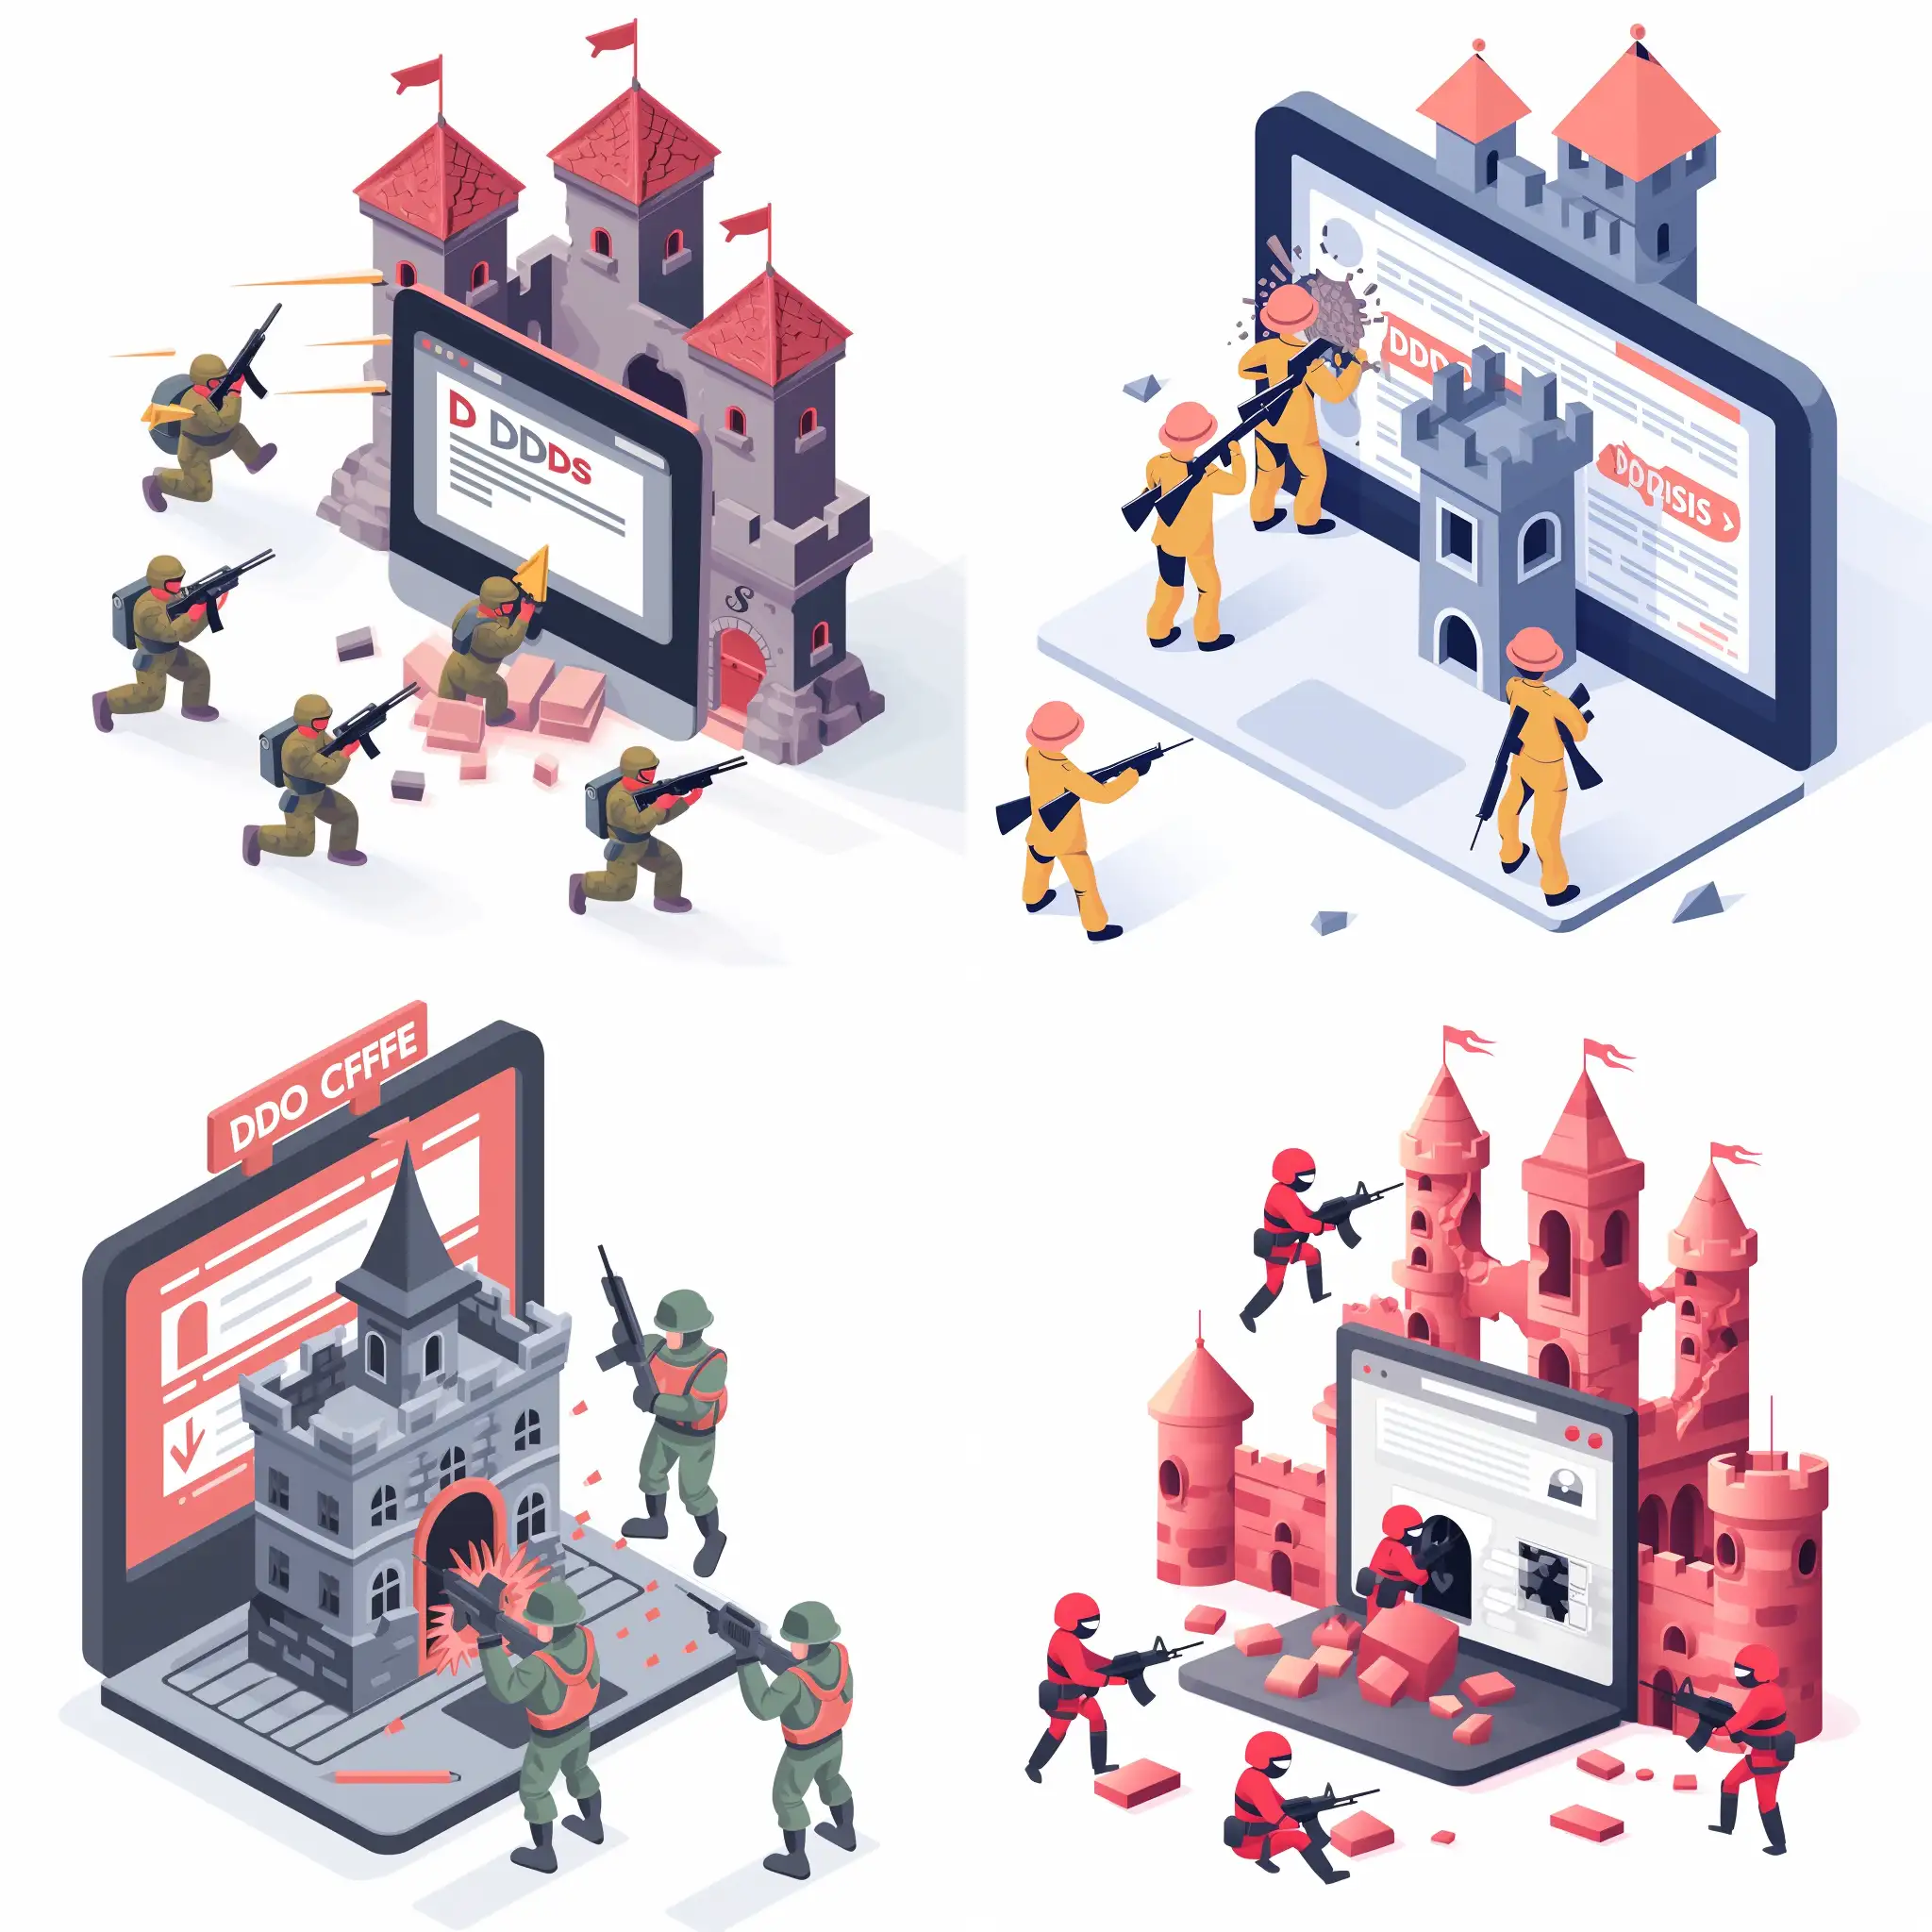 illustration a minimal graphic image about DDoS attack ruining a website. imagine some soldiers attacking to castle of website with concept of DDoS attack with plain white background (Code: FFFF)